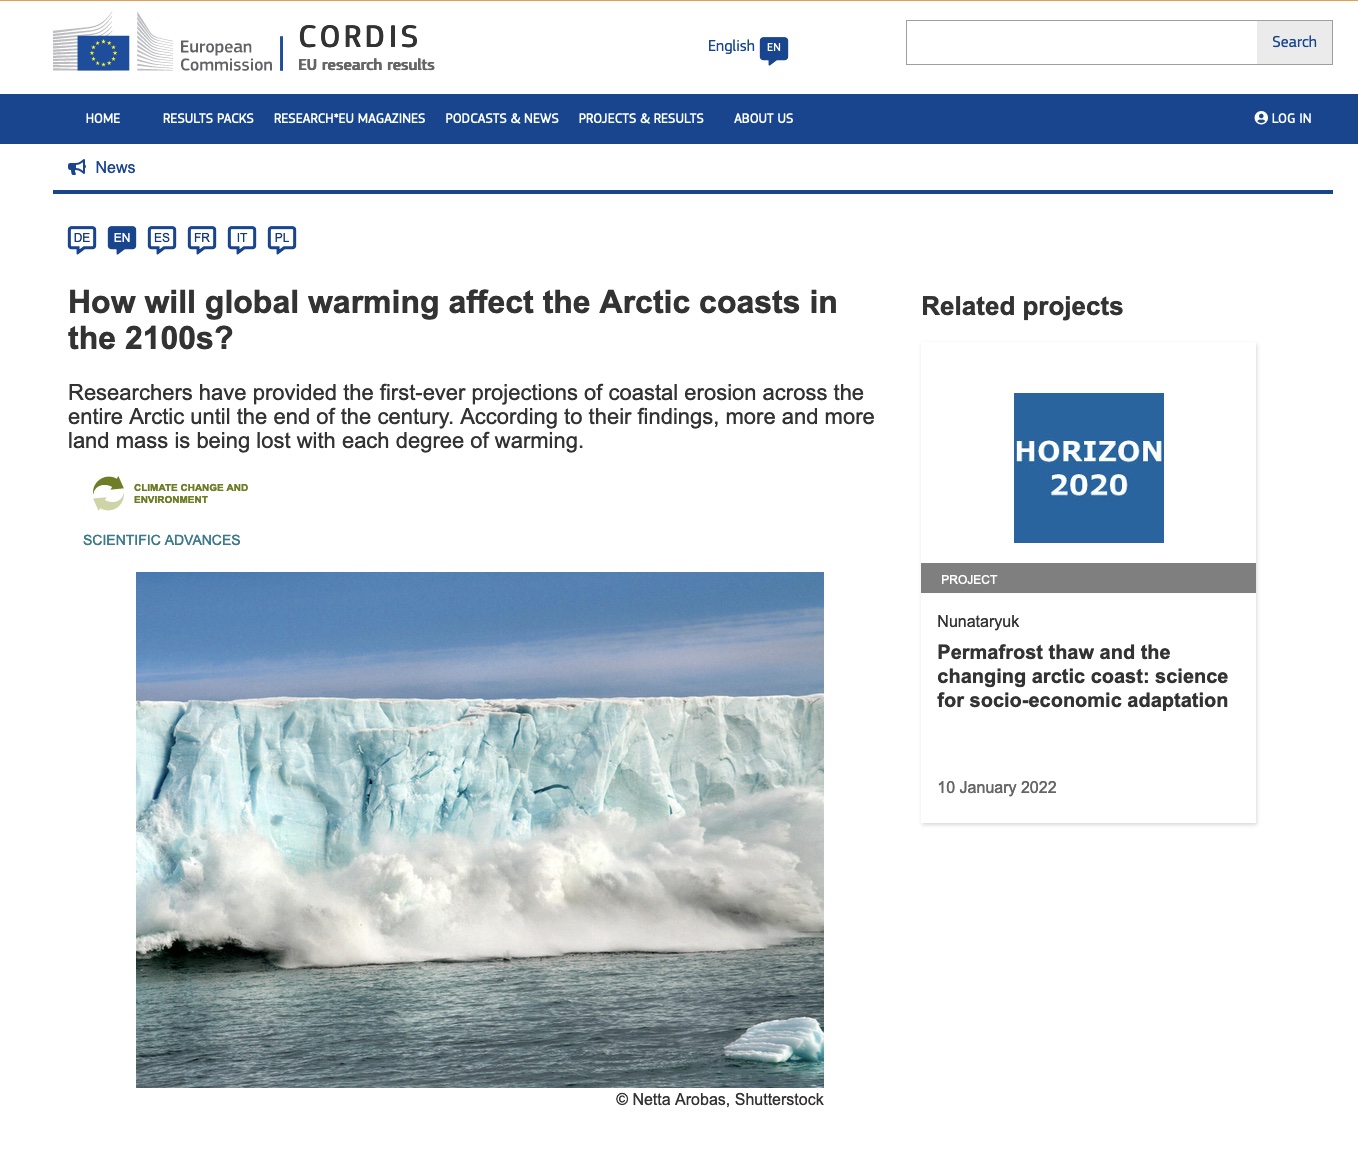 CORDIS highlights the Nature Climate Change publication predicting increase in Arctic coastal erosion 